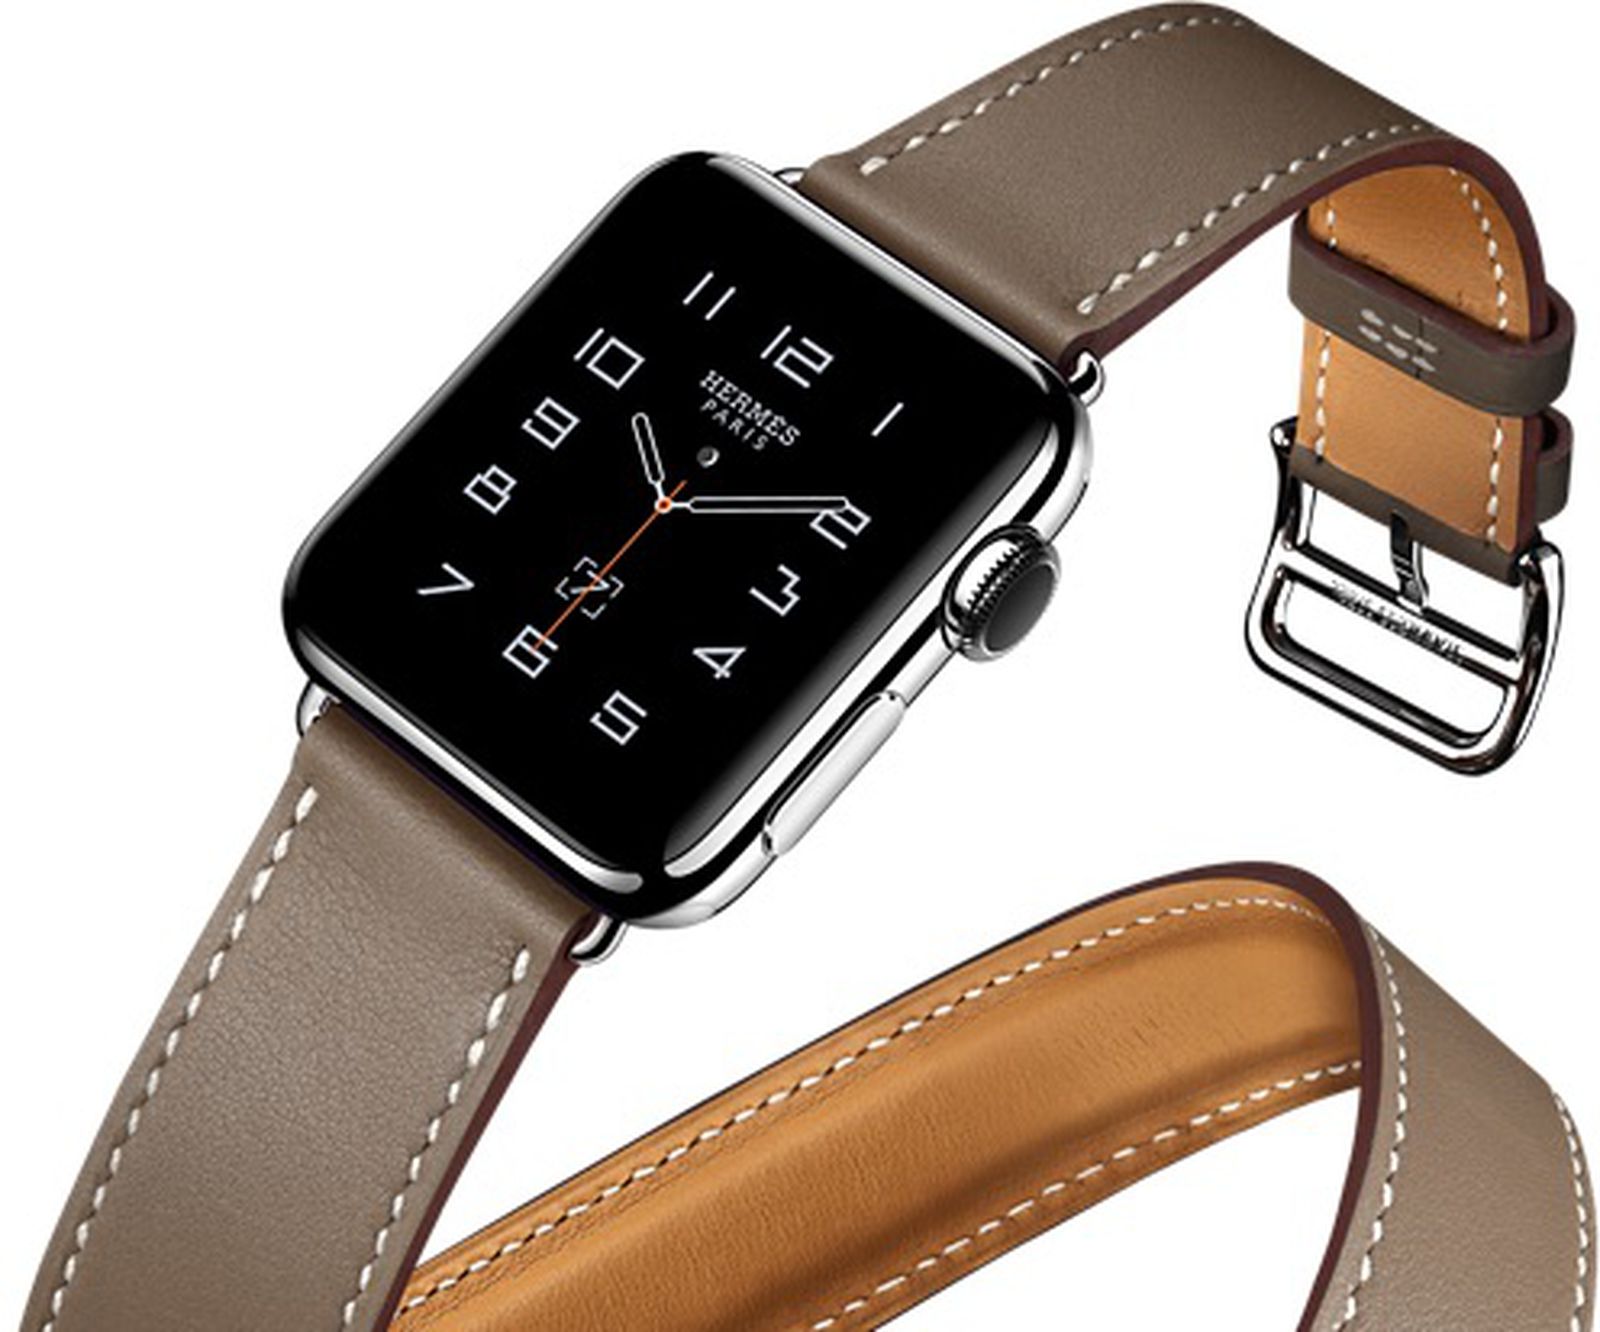 Apple Watch Hermès Series 2 Models Officially Launch Today - MacRumors